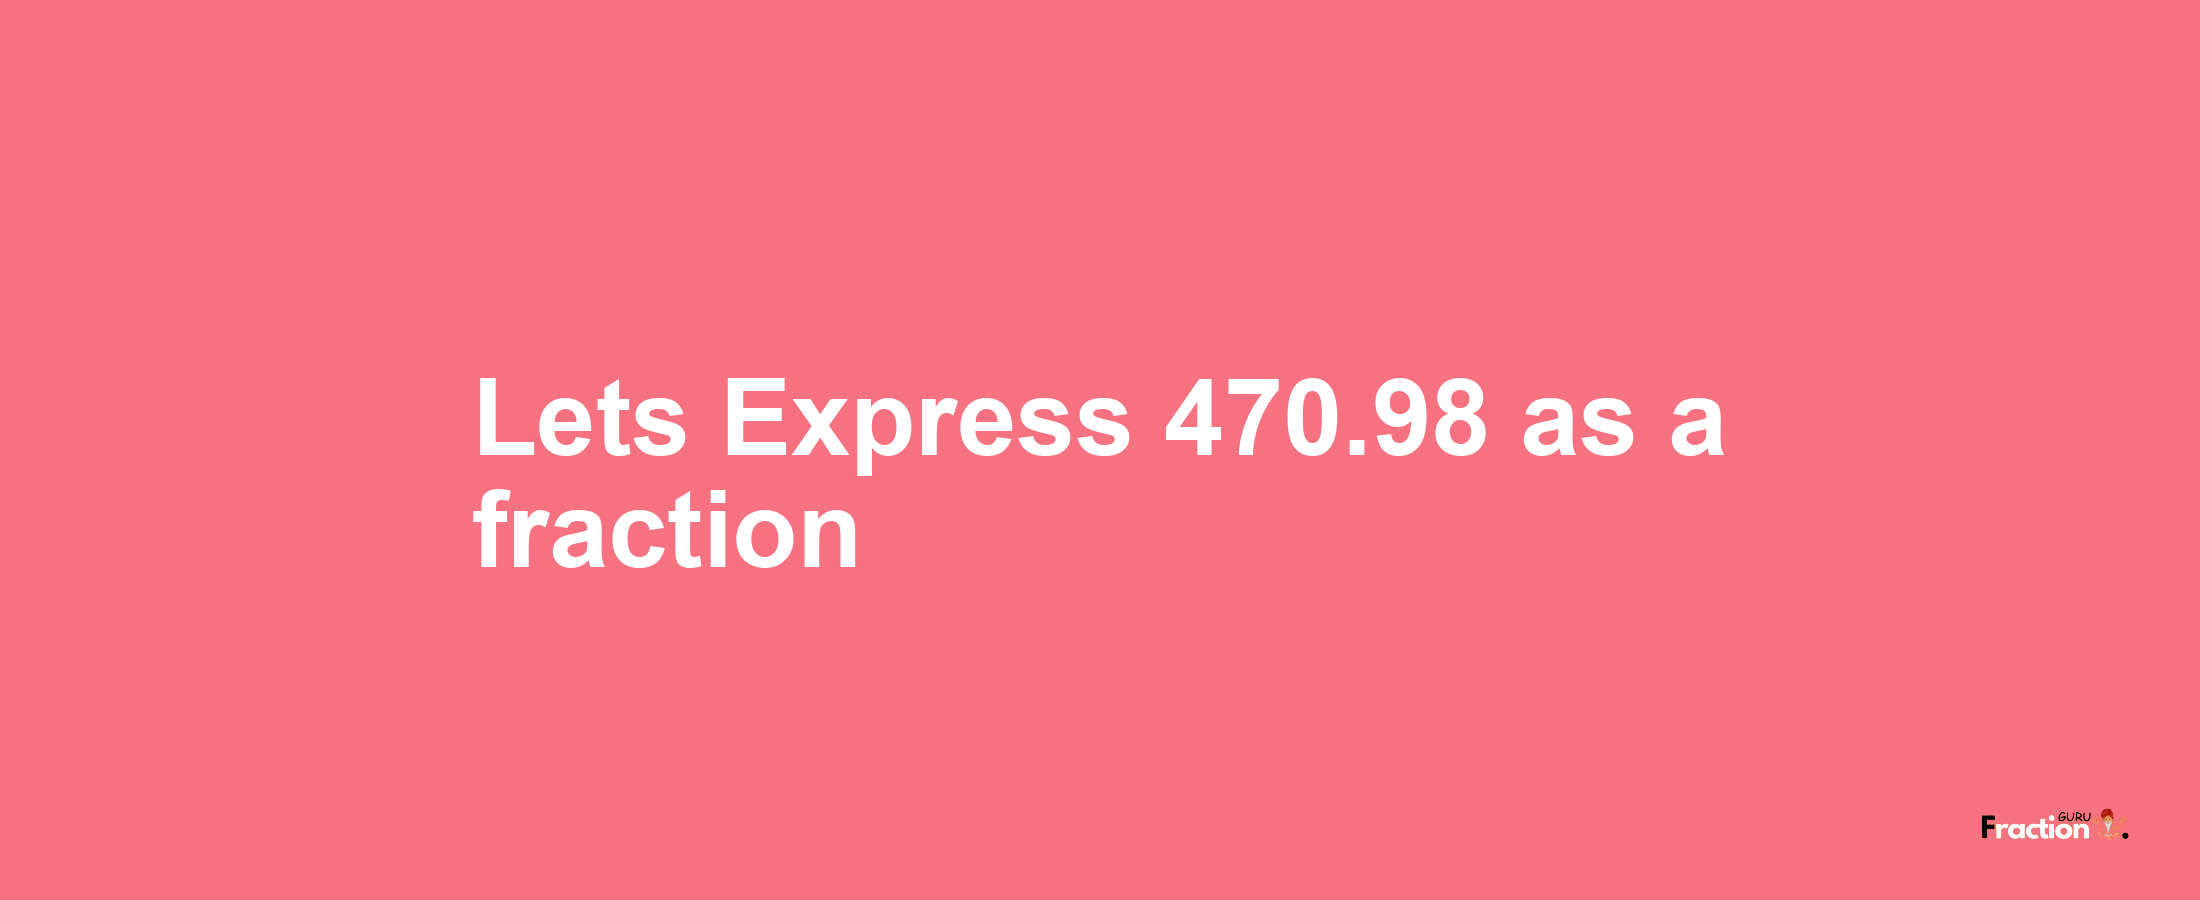 Lets Express 470.98 as afraction